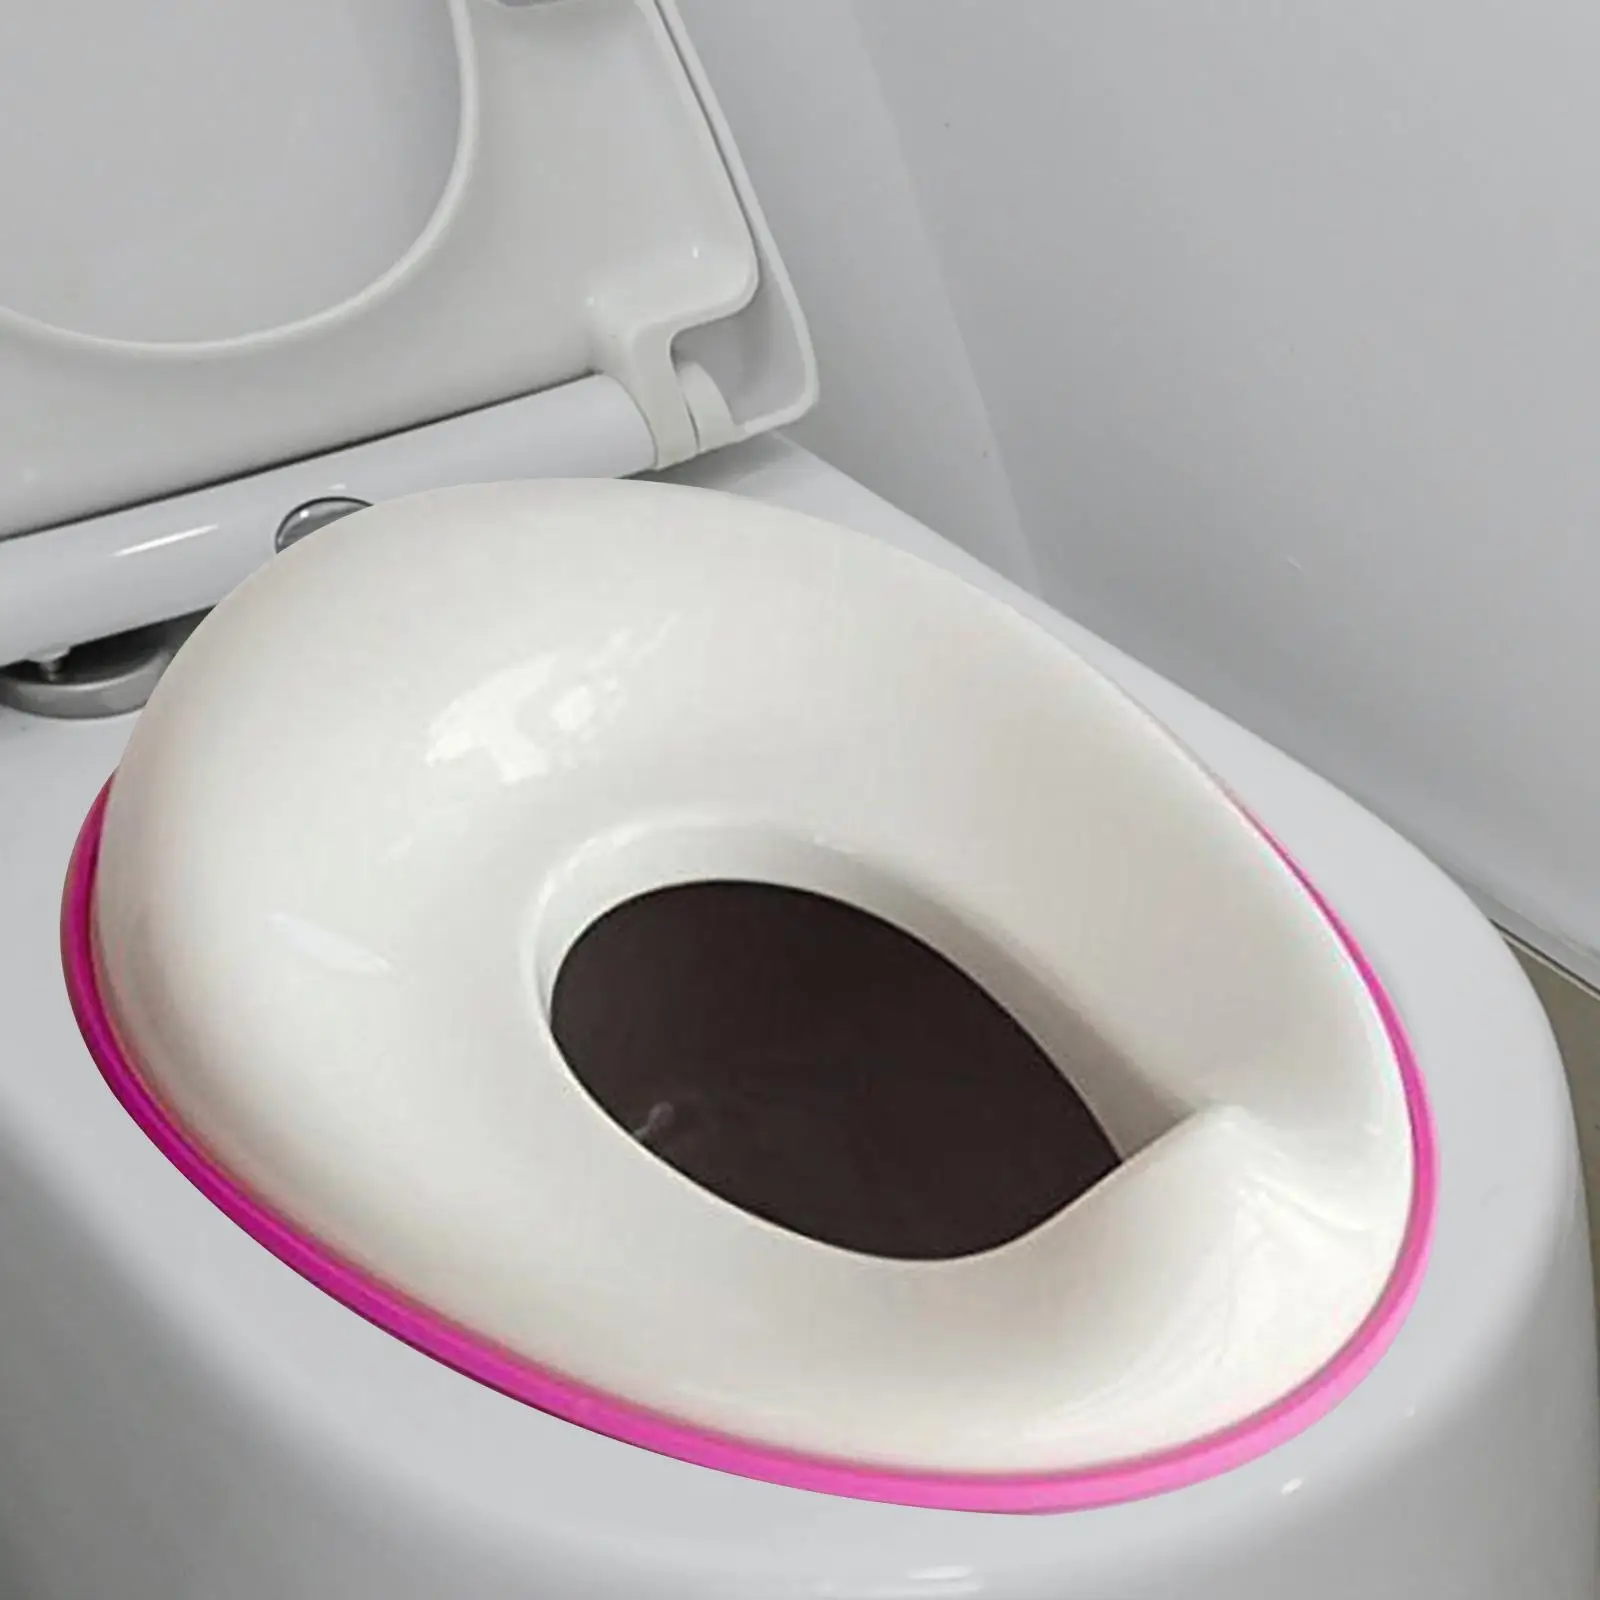 Kids Toddlers Toilet training Seat Fits Round & Oval Toilets Space Saving